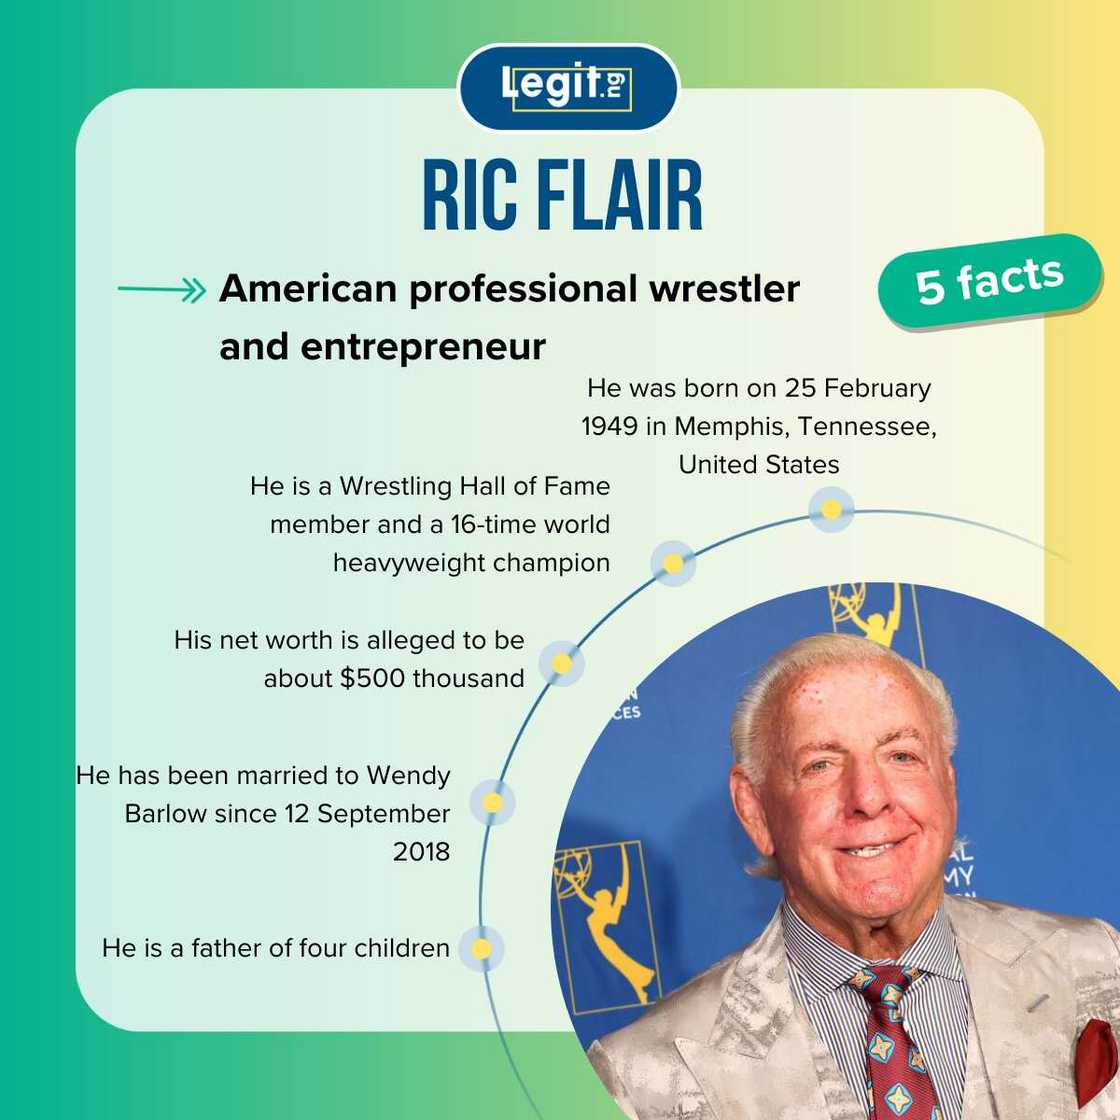 Five facts about Ric Flair